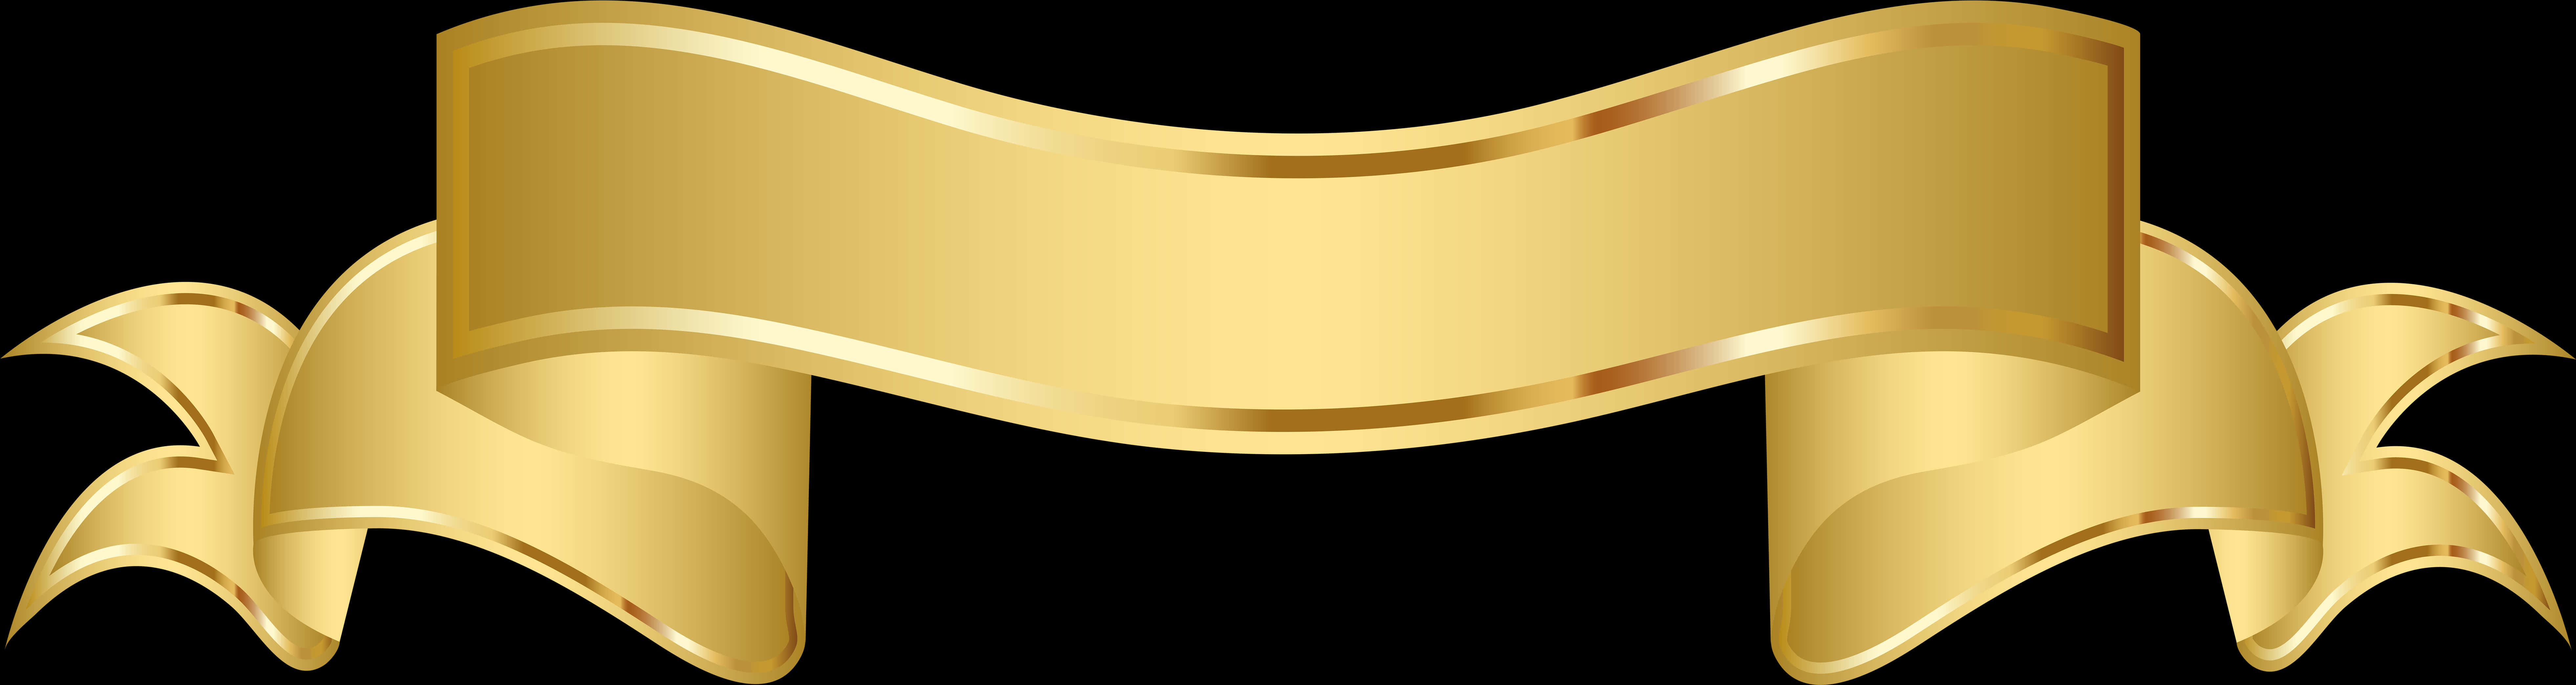 Golden Banner Ribbon Graphic PNG